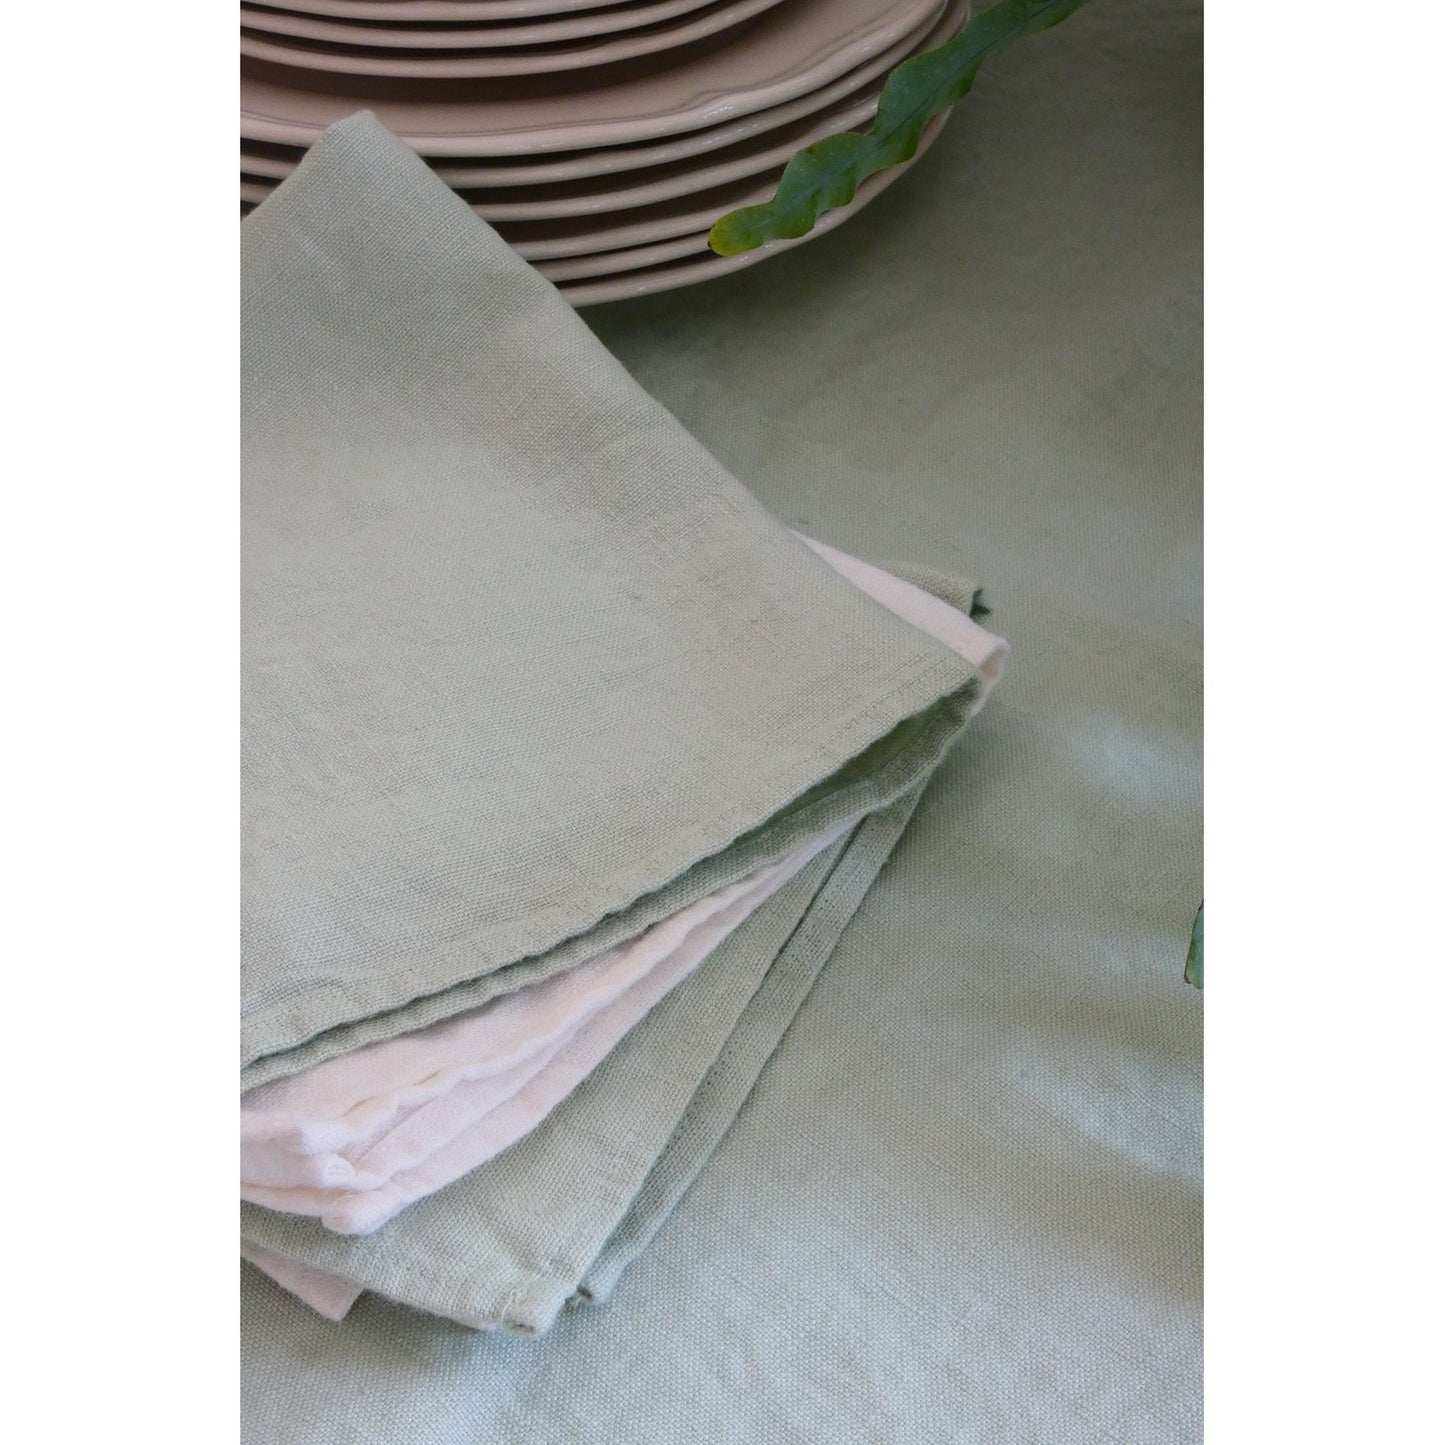 Emma washed linen napkin 4 pieces per pack -  available in 5 colors